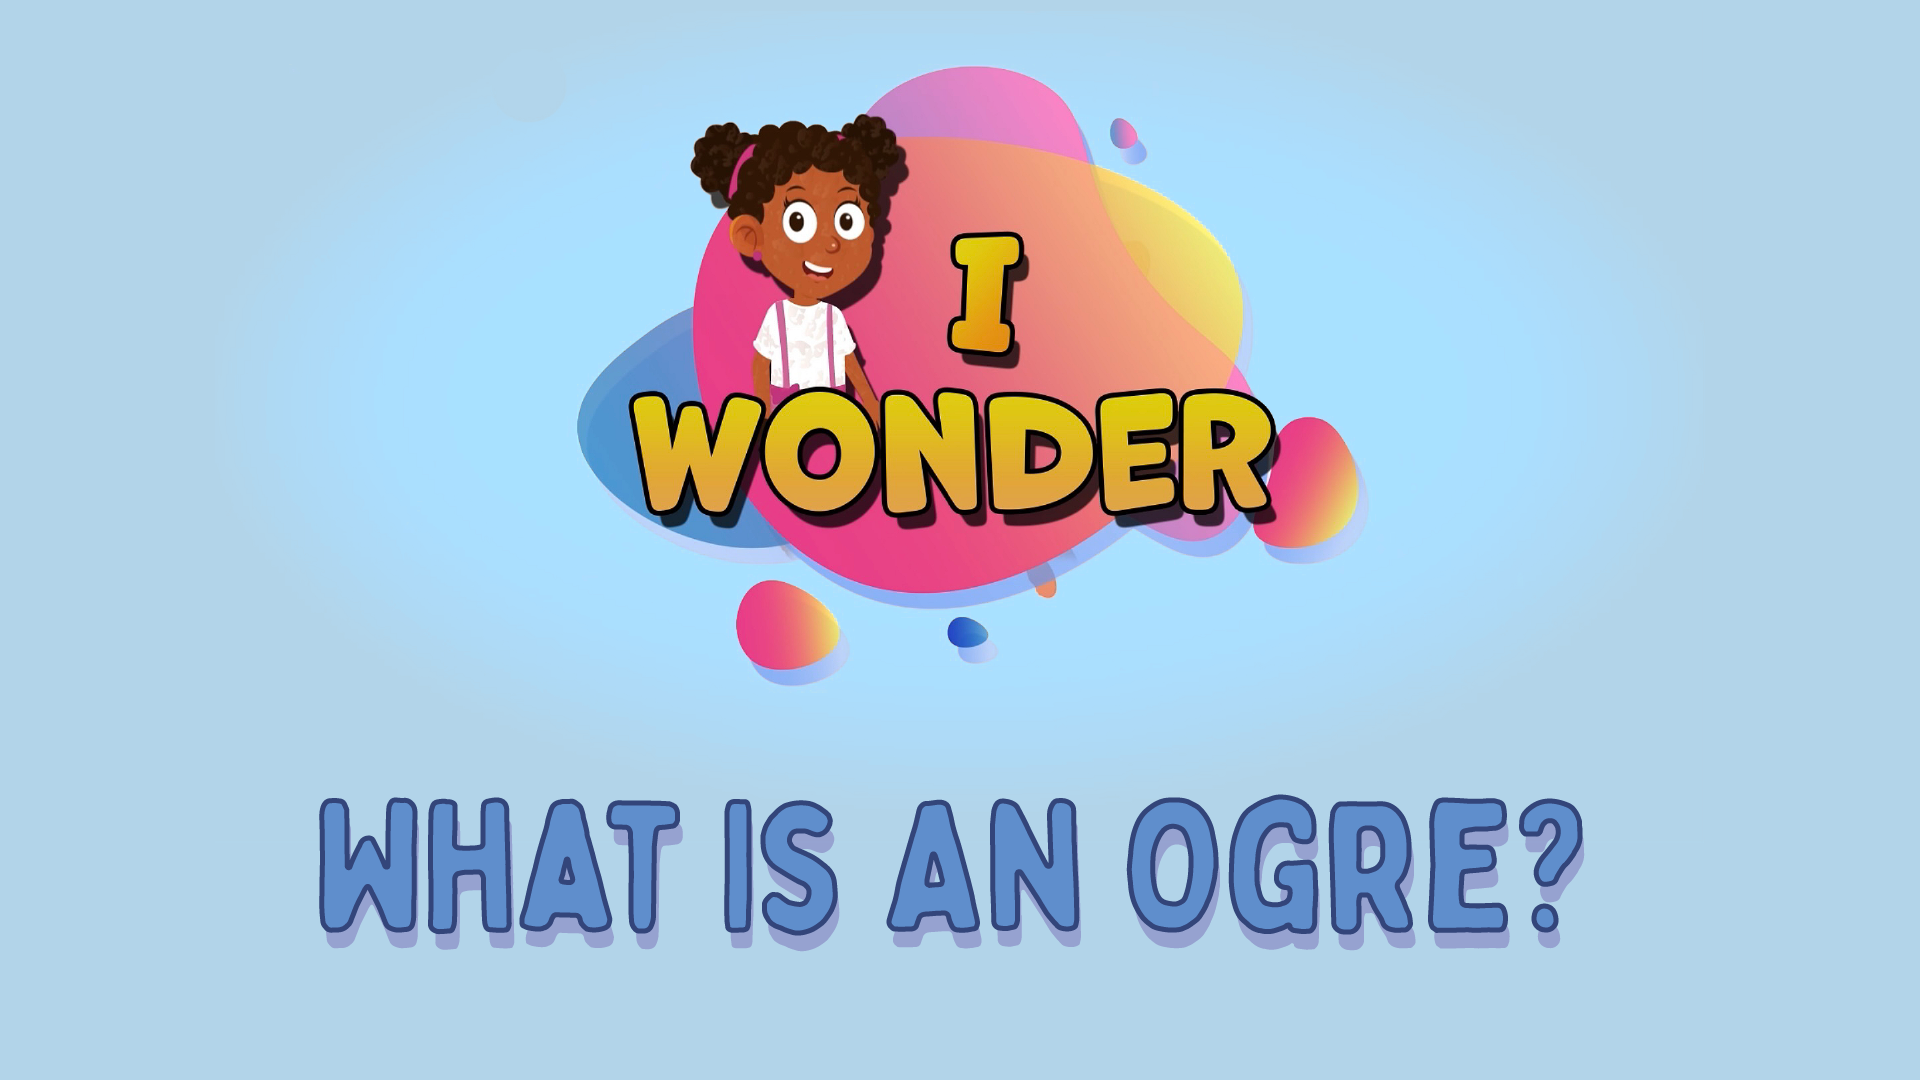 What Is An Ogre?